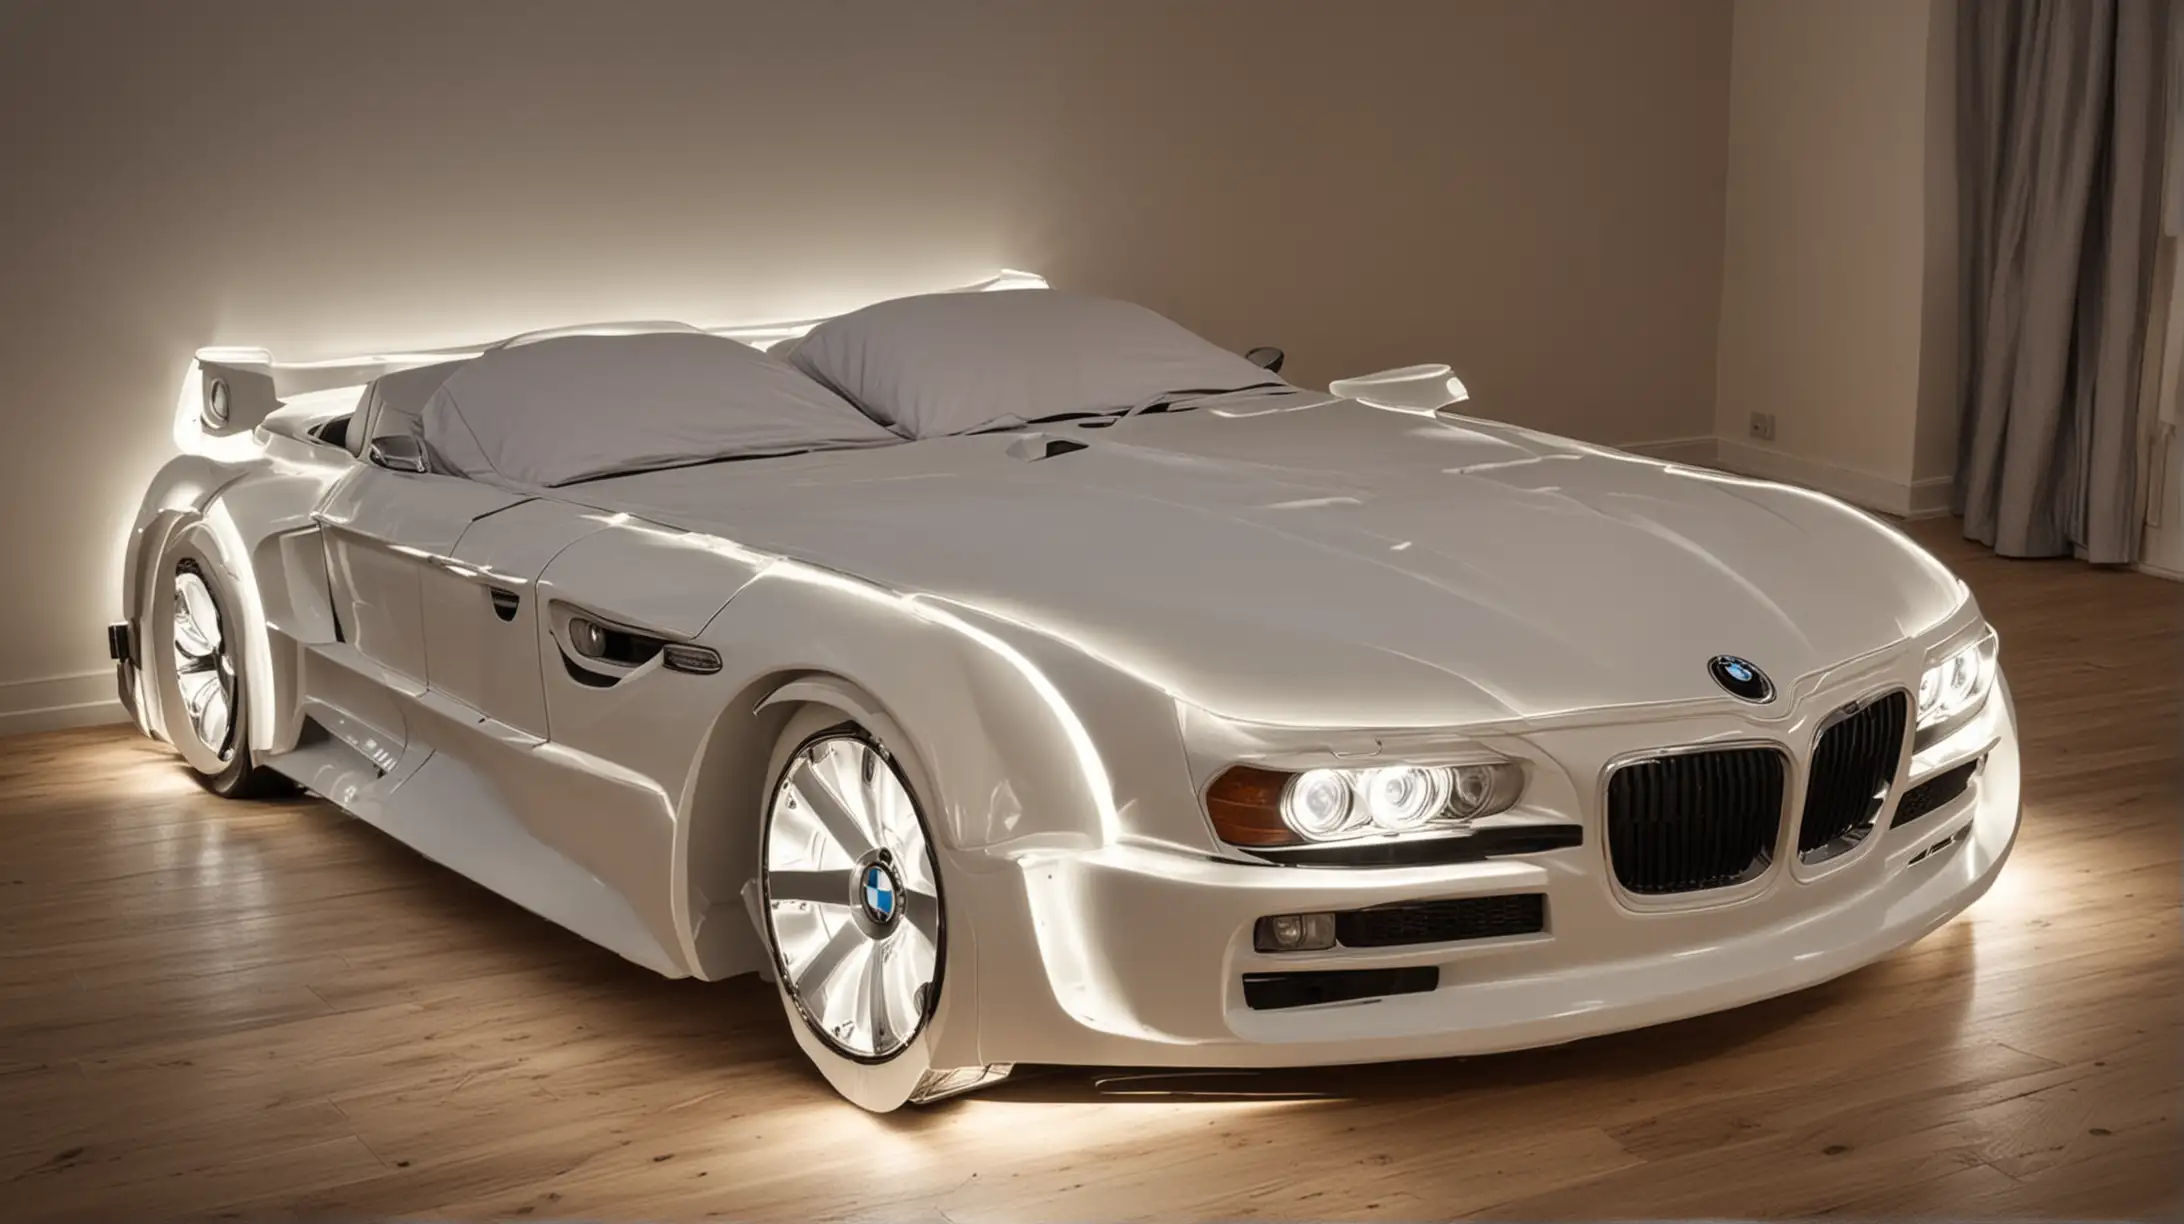 Luxury Double Bed Shaped Like a BMW Car with Illuminated Headlights